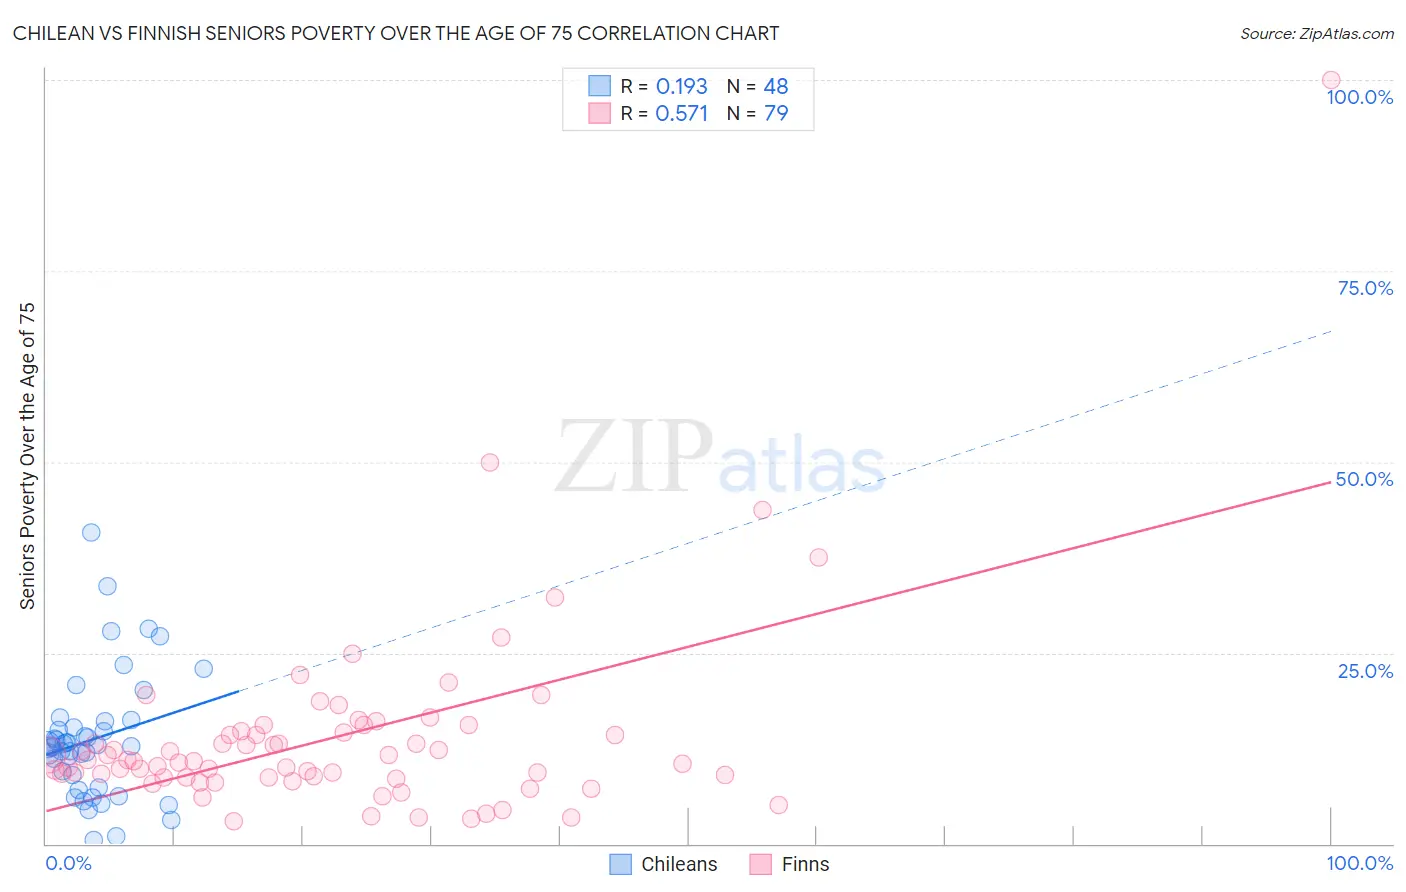 Chilean vs Finnish Seniors Poverty Over the Age of 75